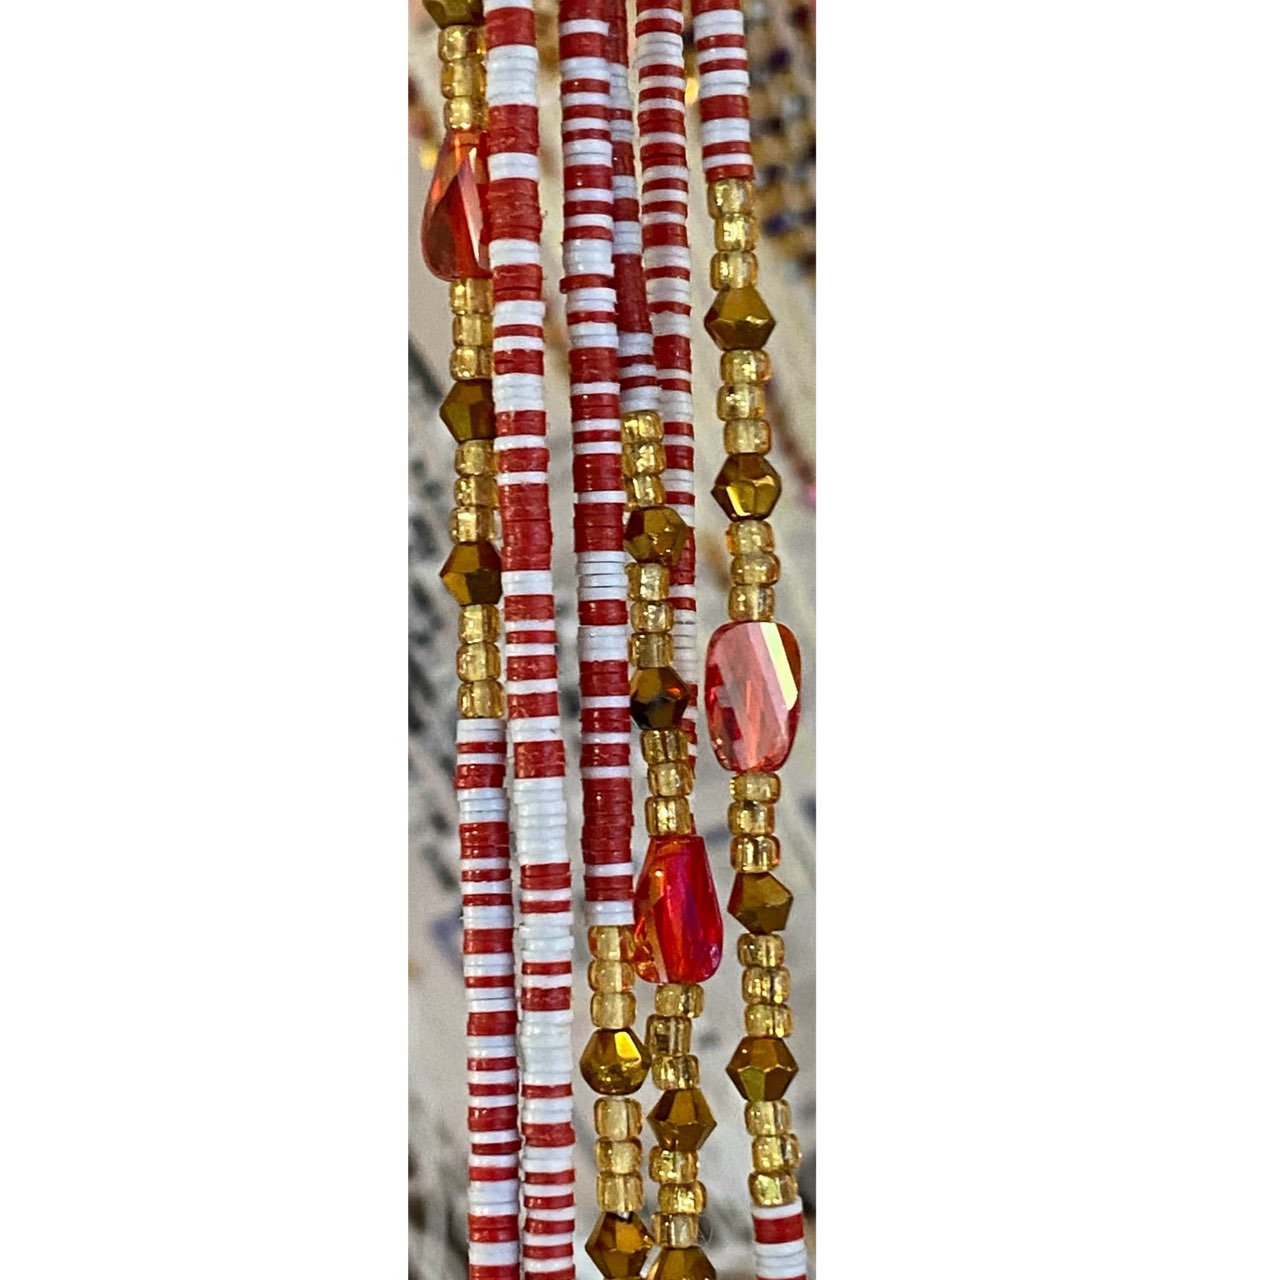 Red & White Vinyl Disk Waist Beads with accent beads